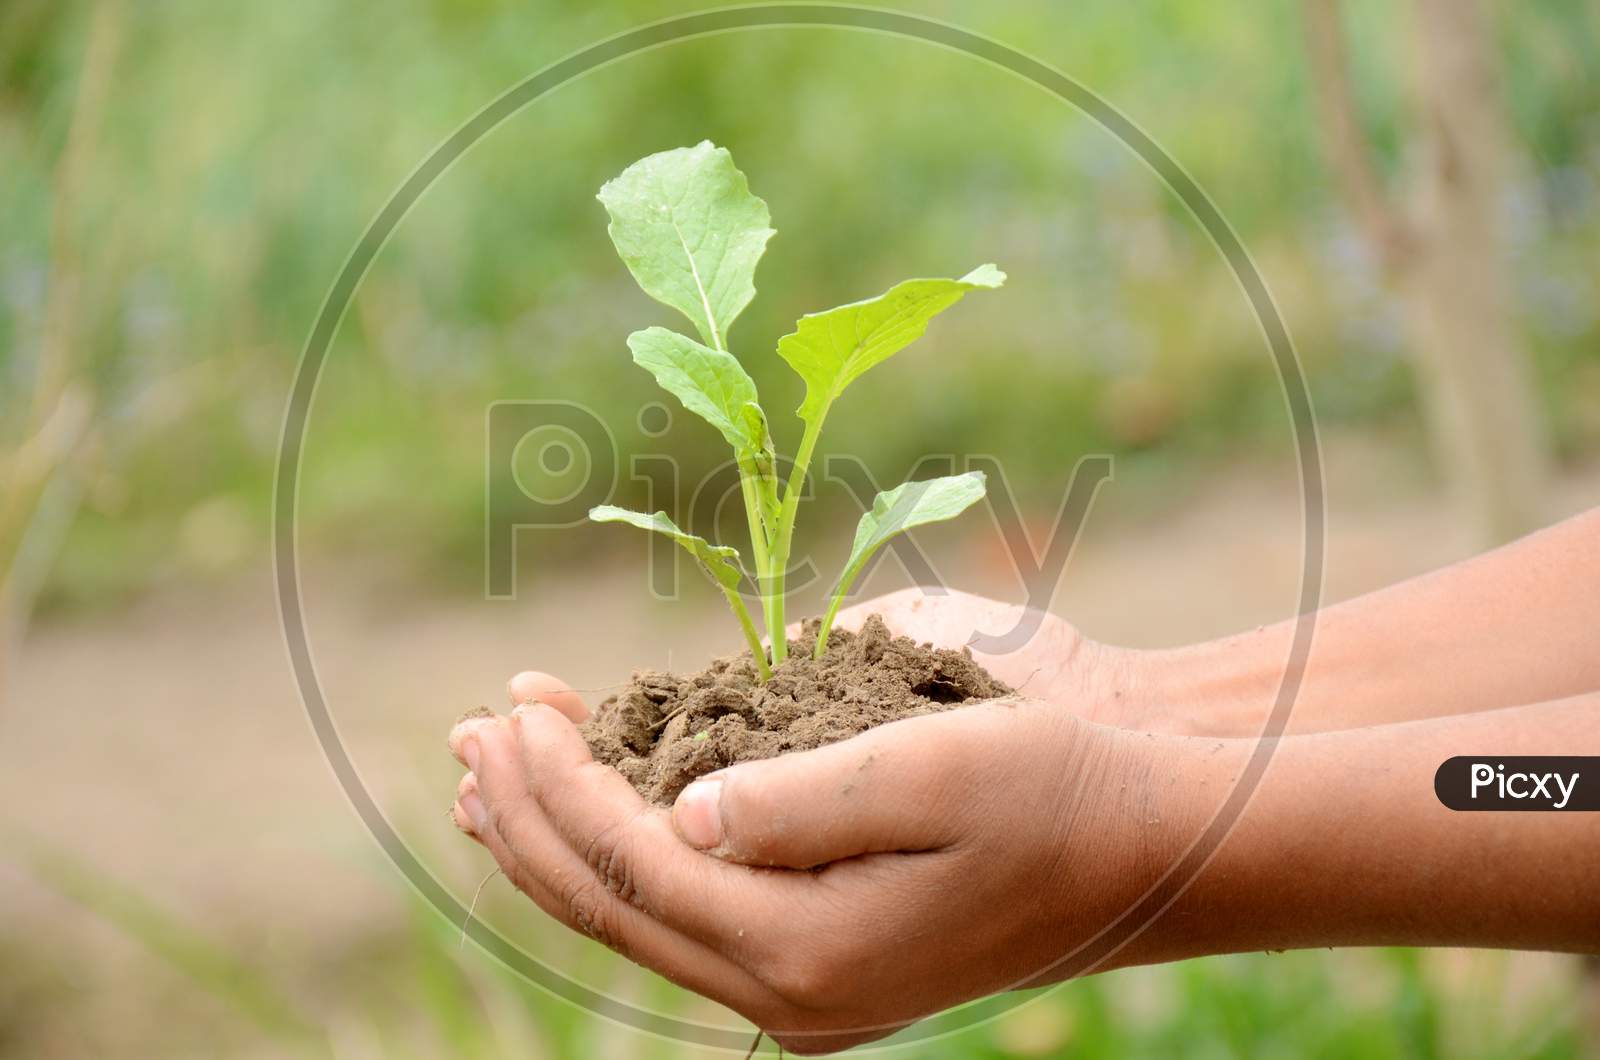 Spinach Plant Soil Heap In Hands Over Out Of Focus Green Background.